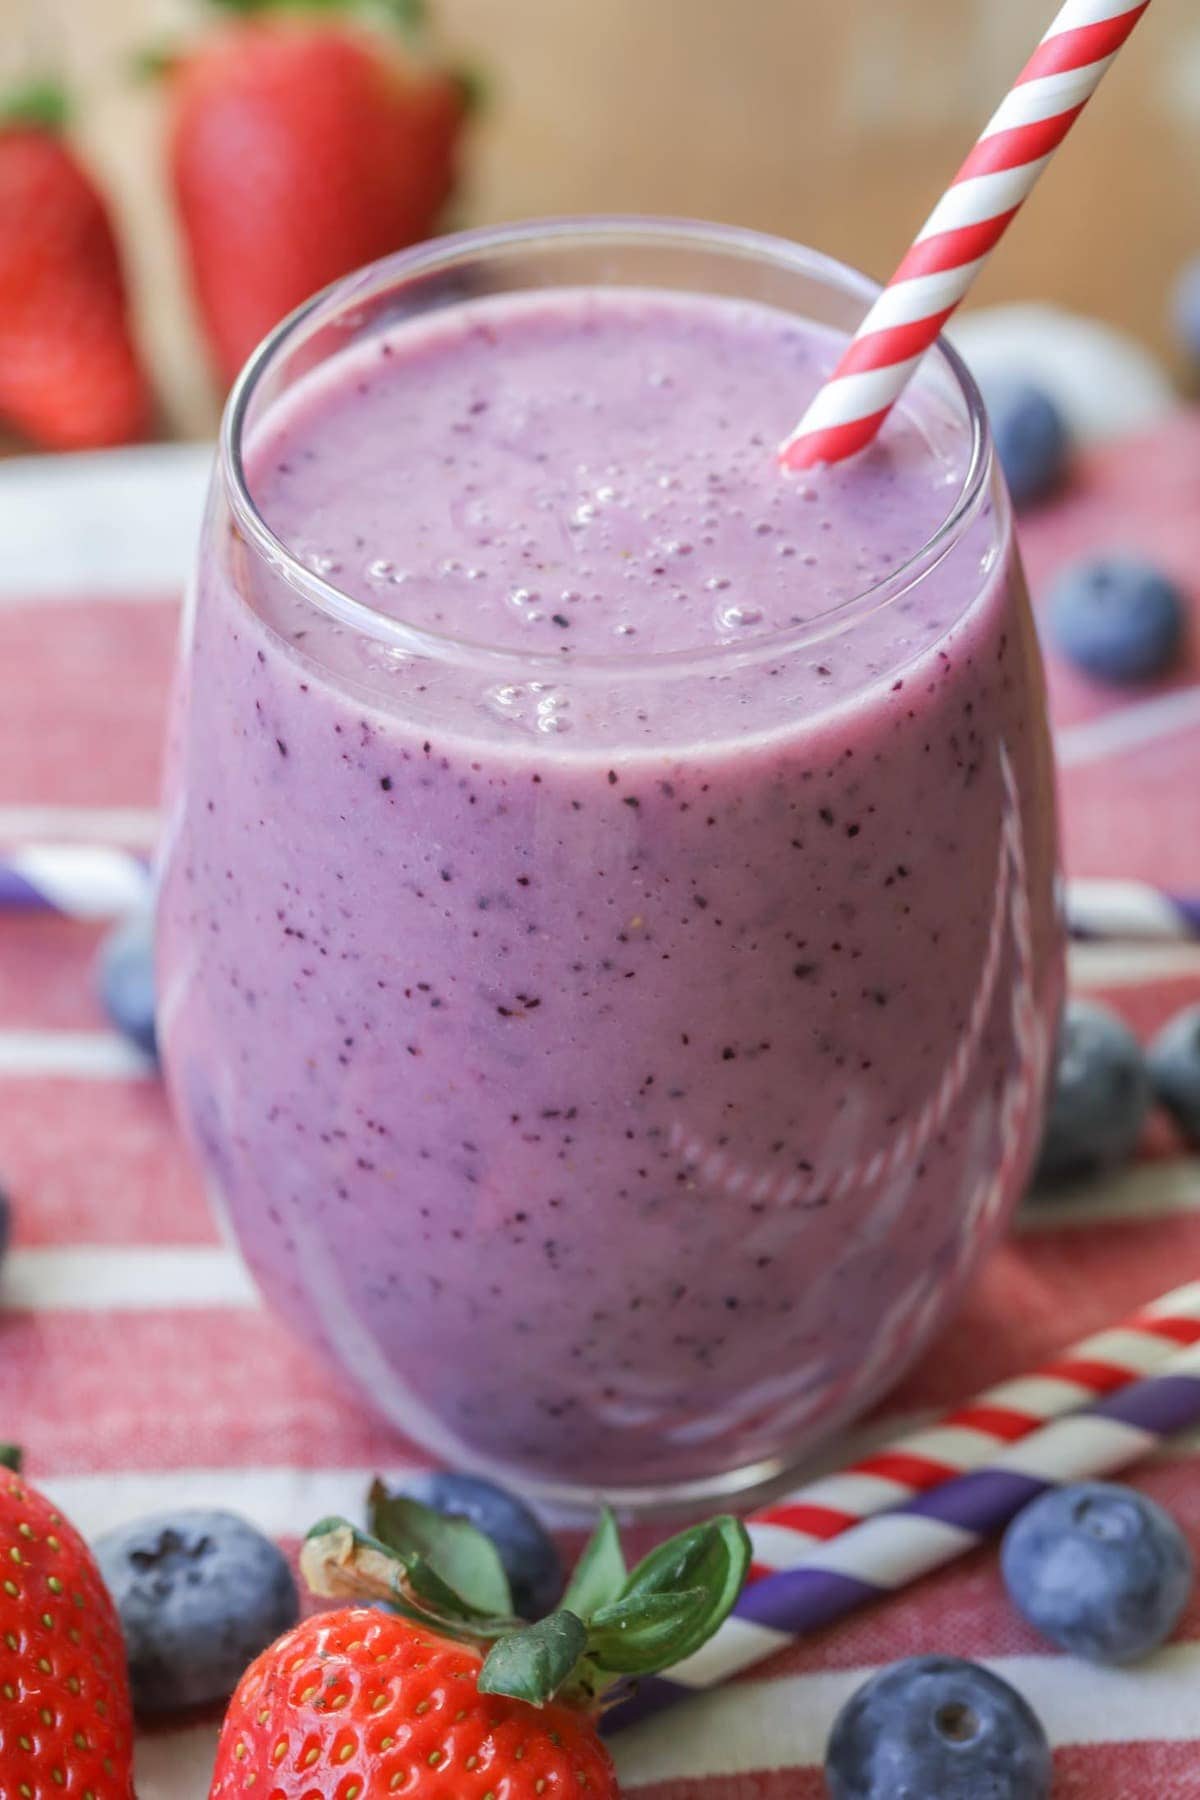 Strawberry and Blueberry Smoothies in a glass